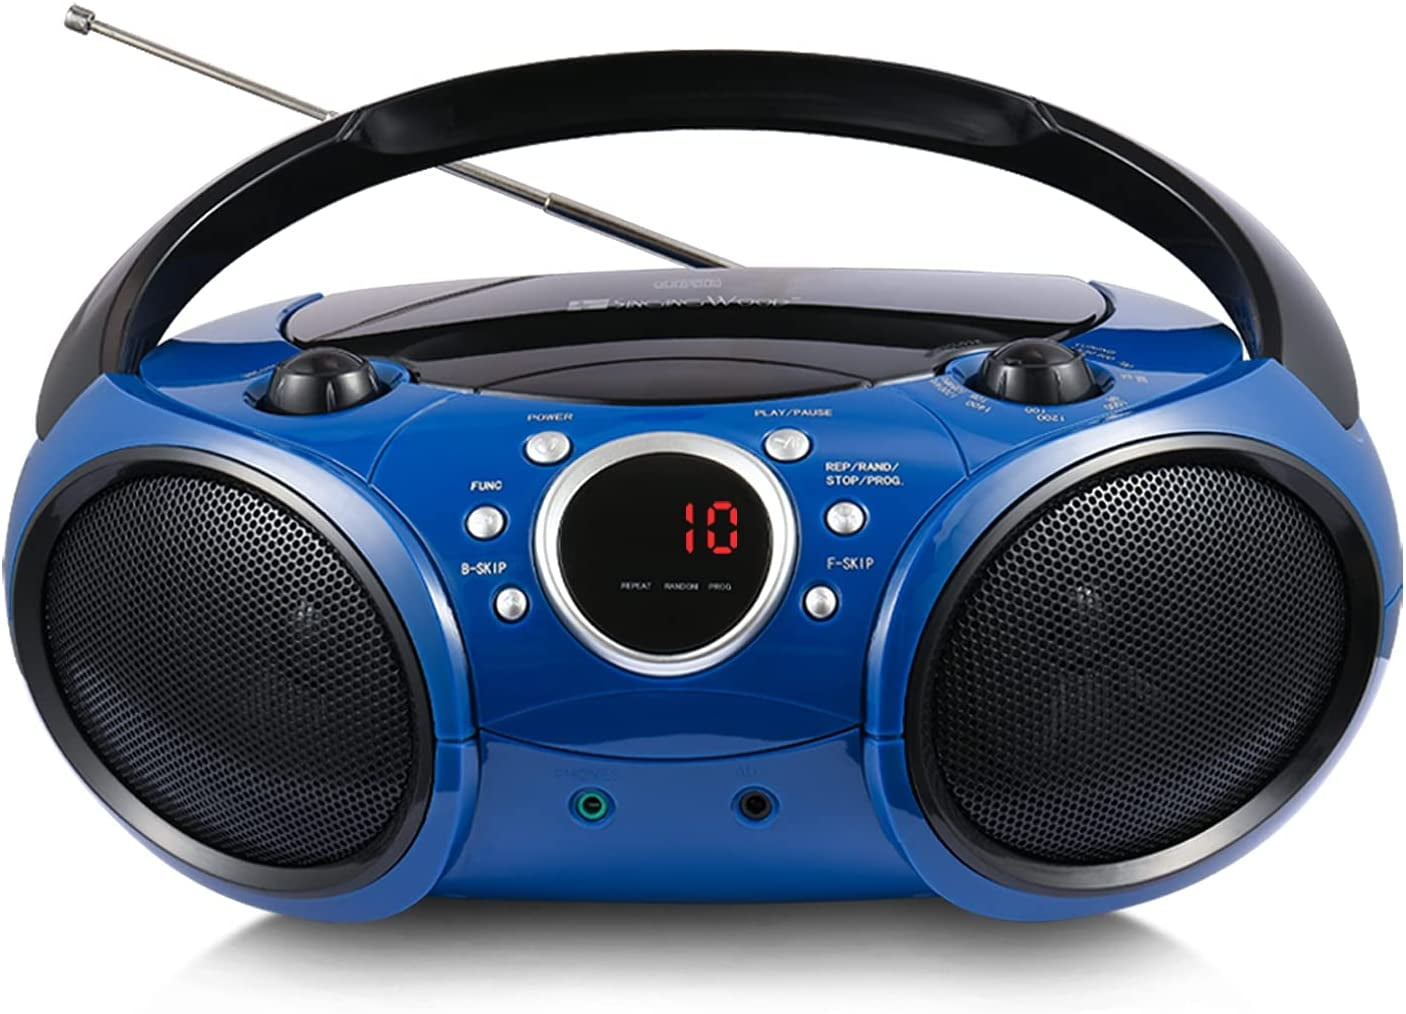 Gelielim CD Player Boombox， Portable CD Player with Bluetooth